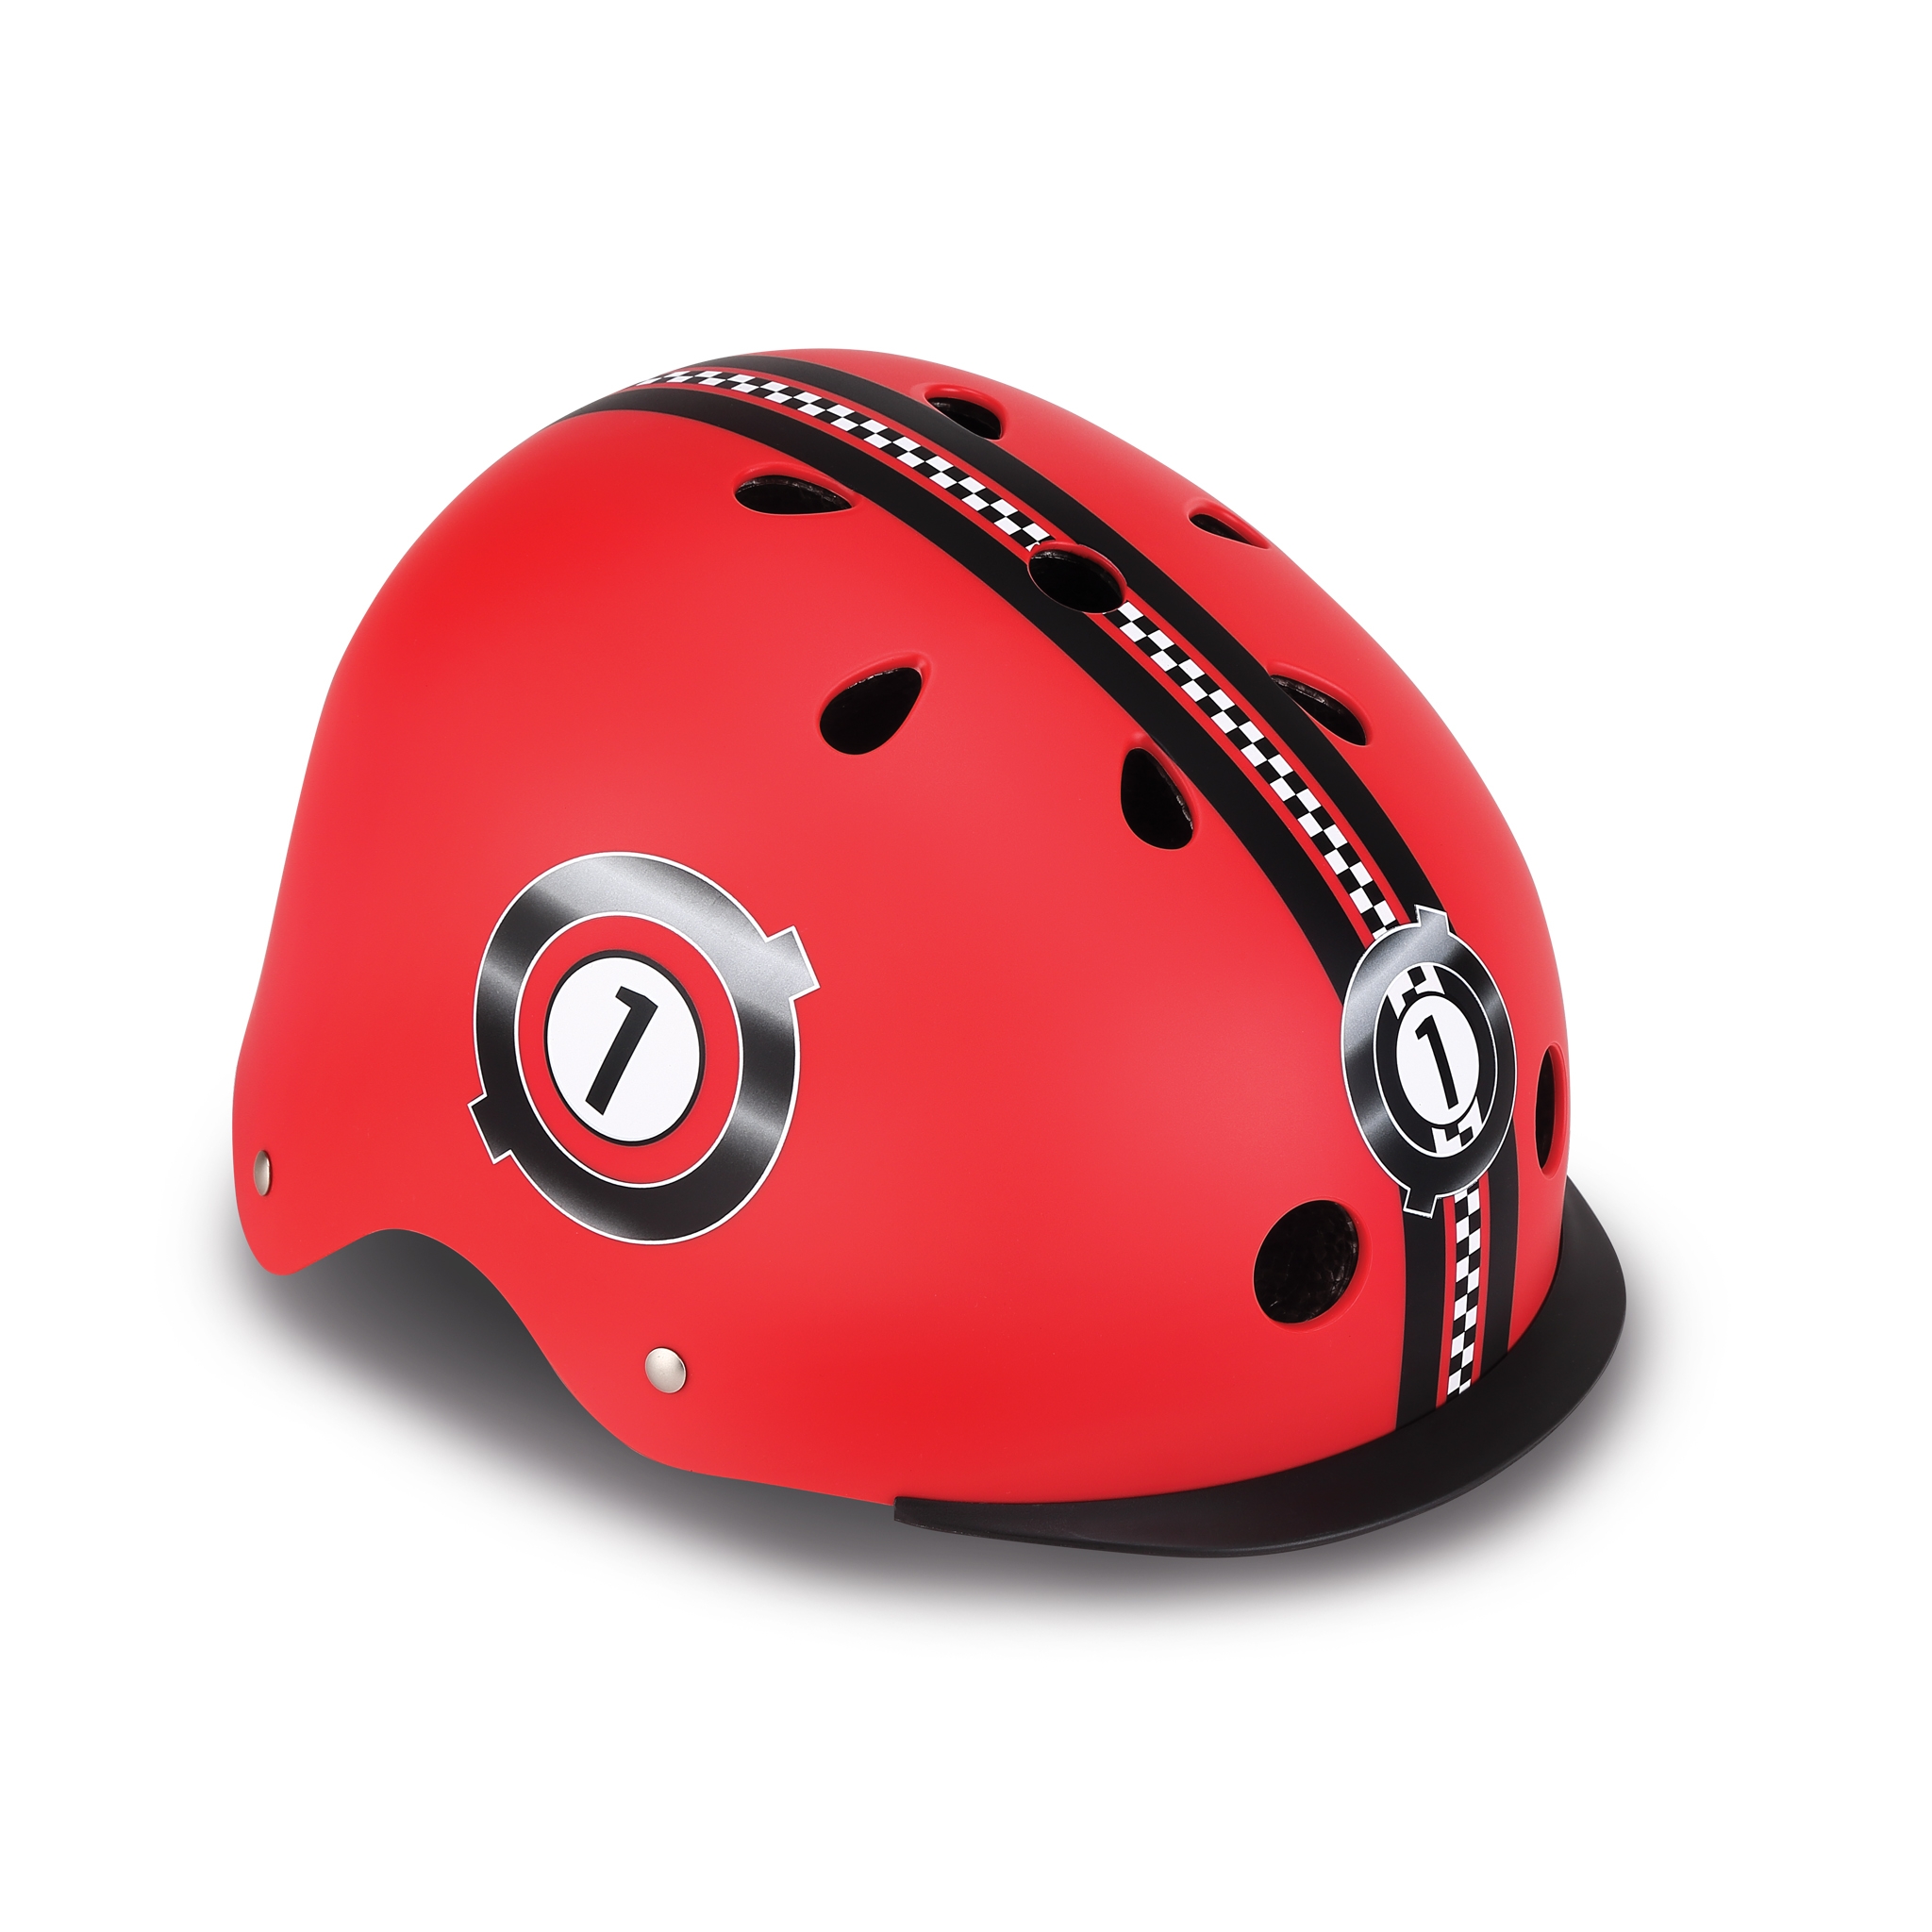 ELITE-helmets-scooter-helmets-for-kids-in-mold-polycarbonate-outer-shell-new-red 0